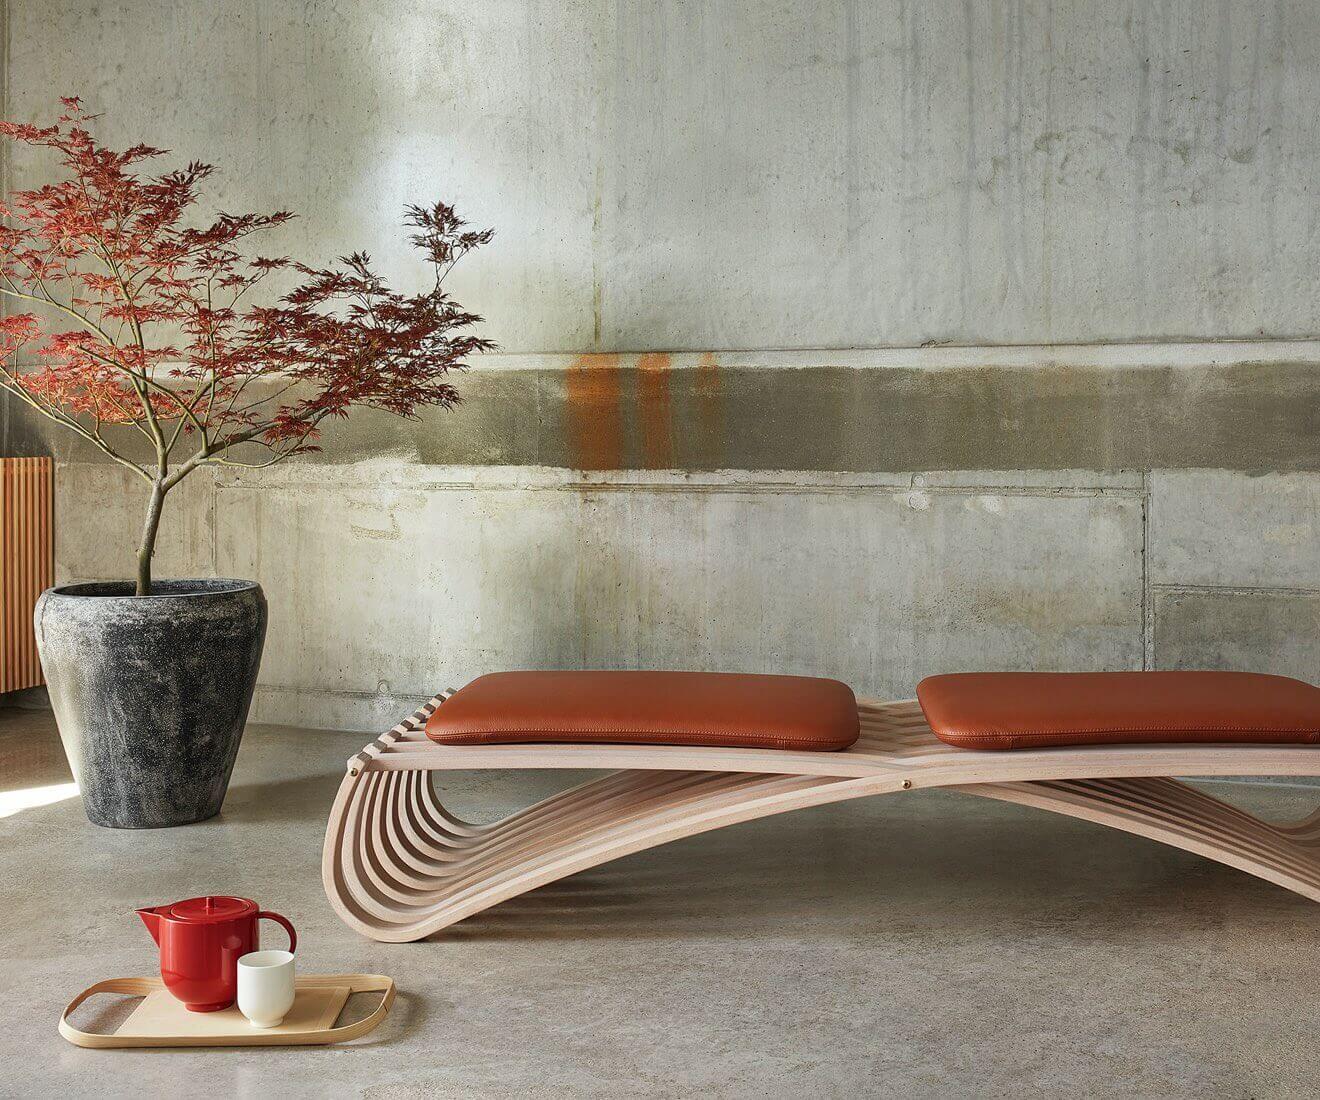 Introducing our JUNDO daybed with beech painted wood base and 2 cushions in cognac Optimo leather from Sorensen.

Jundo is Japanese for purity, which is what the designer, Mads Emil Garde sought for with this poetic design. It is the examination of